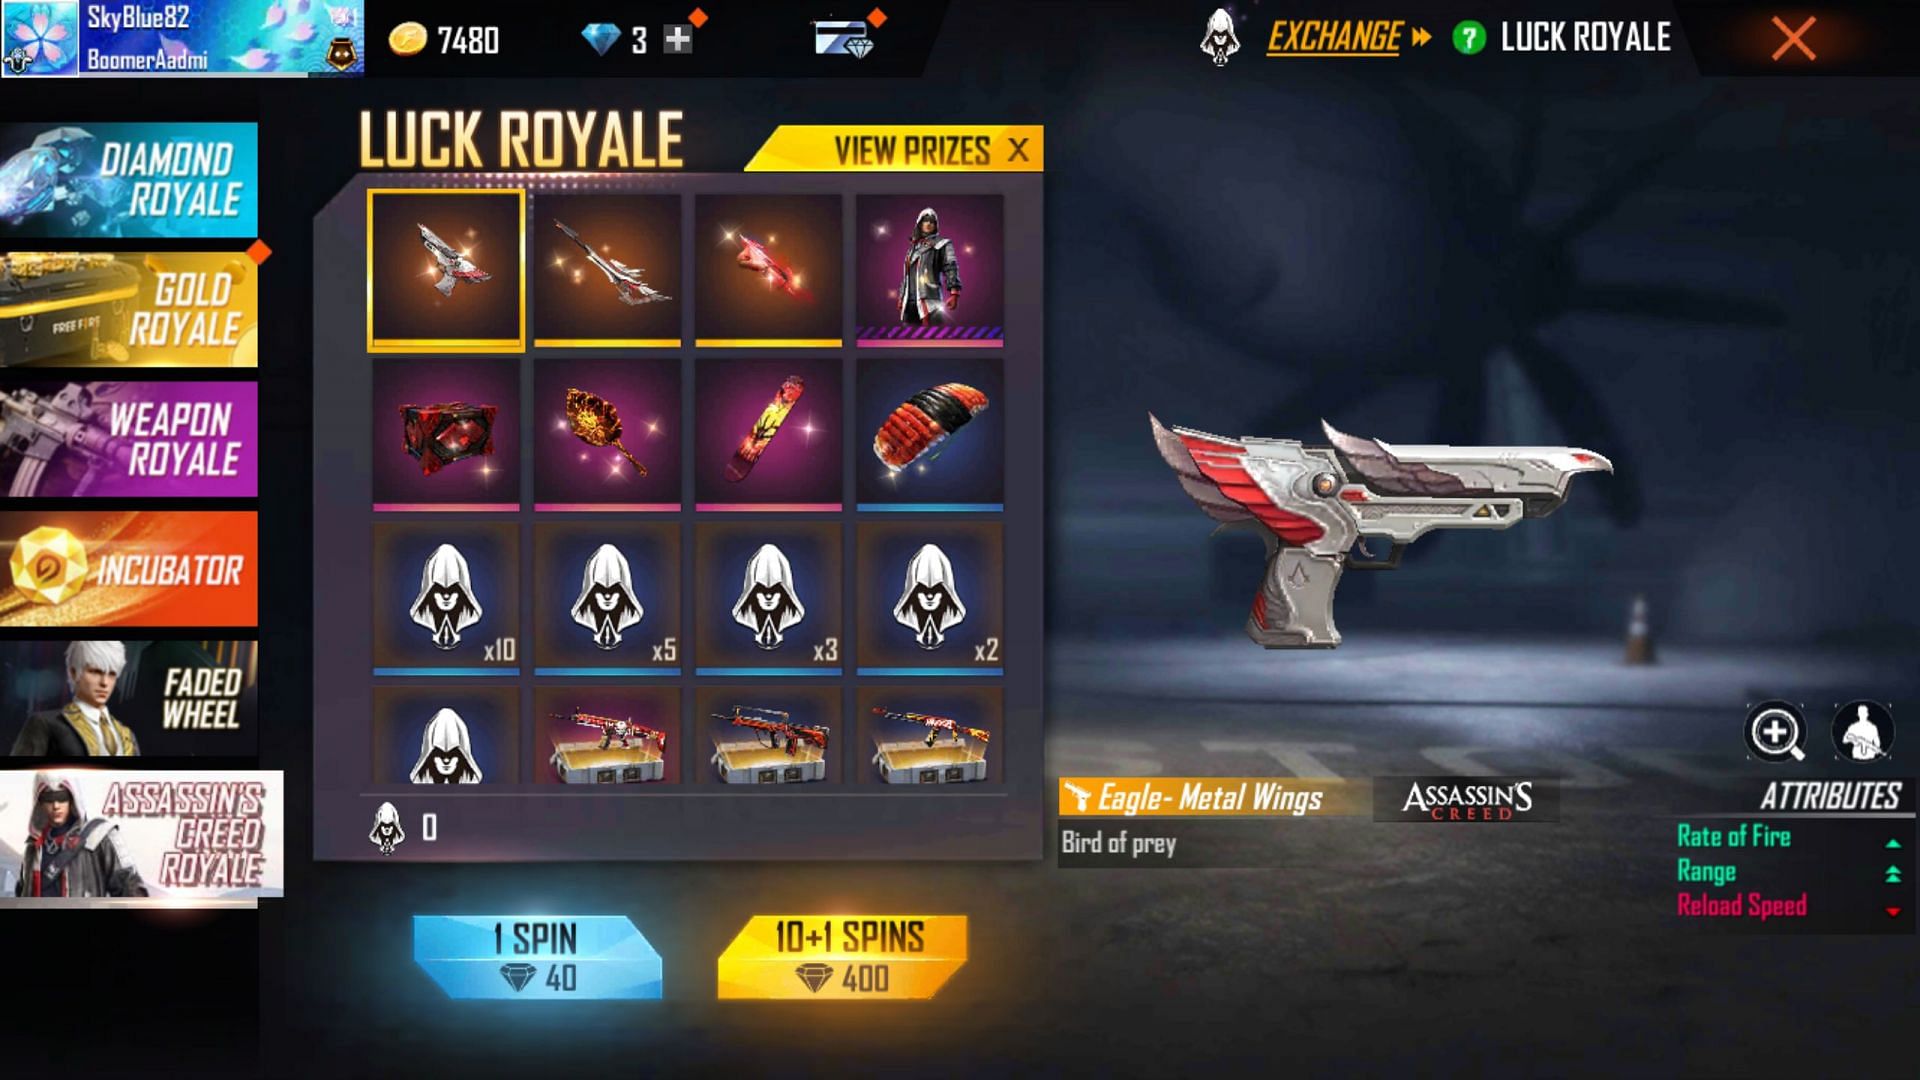 A new Luck Royale has started in the game (Image via Garena)